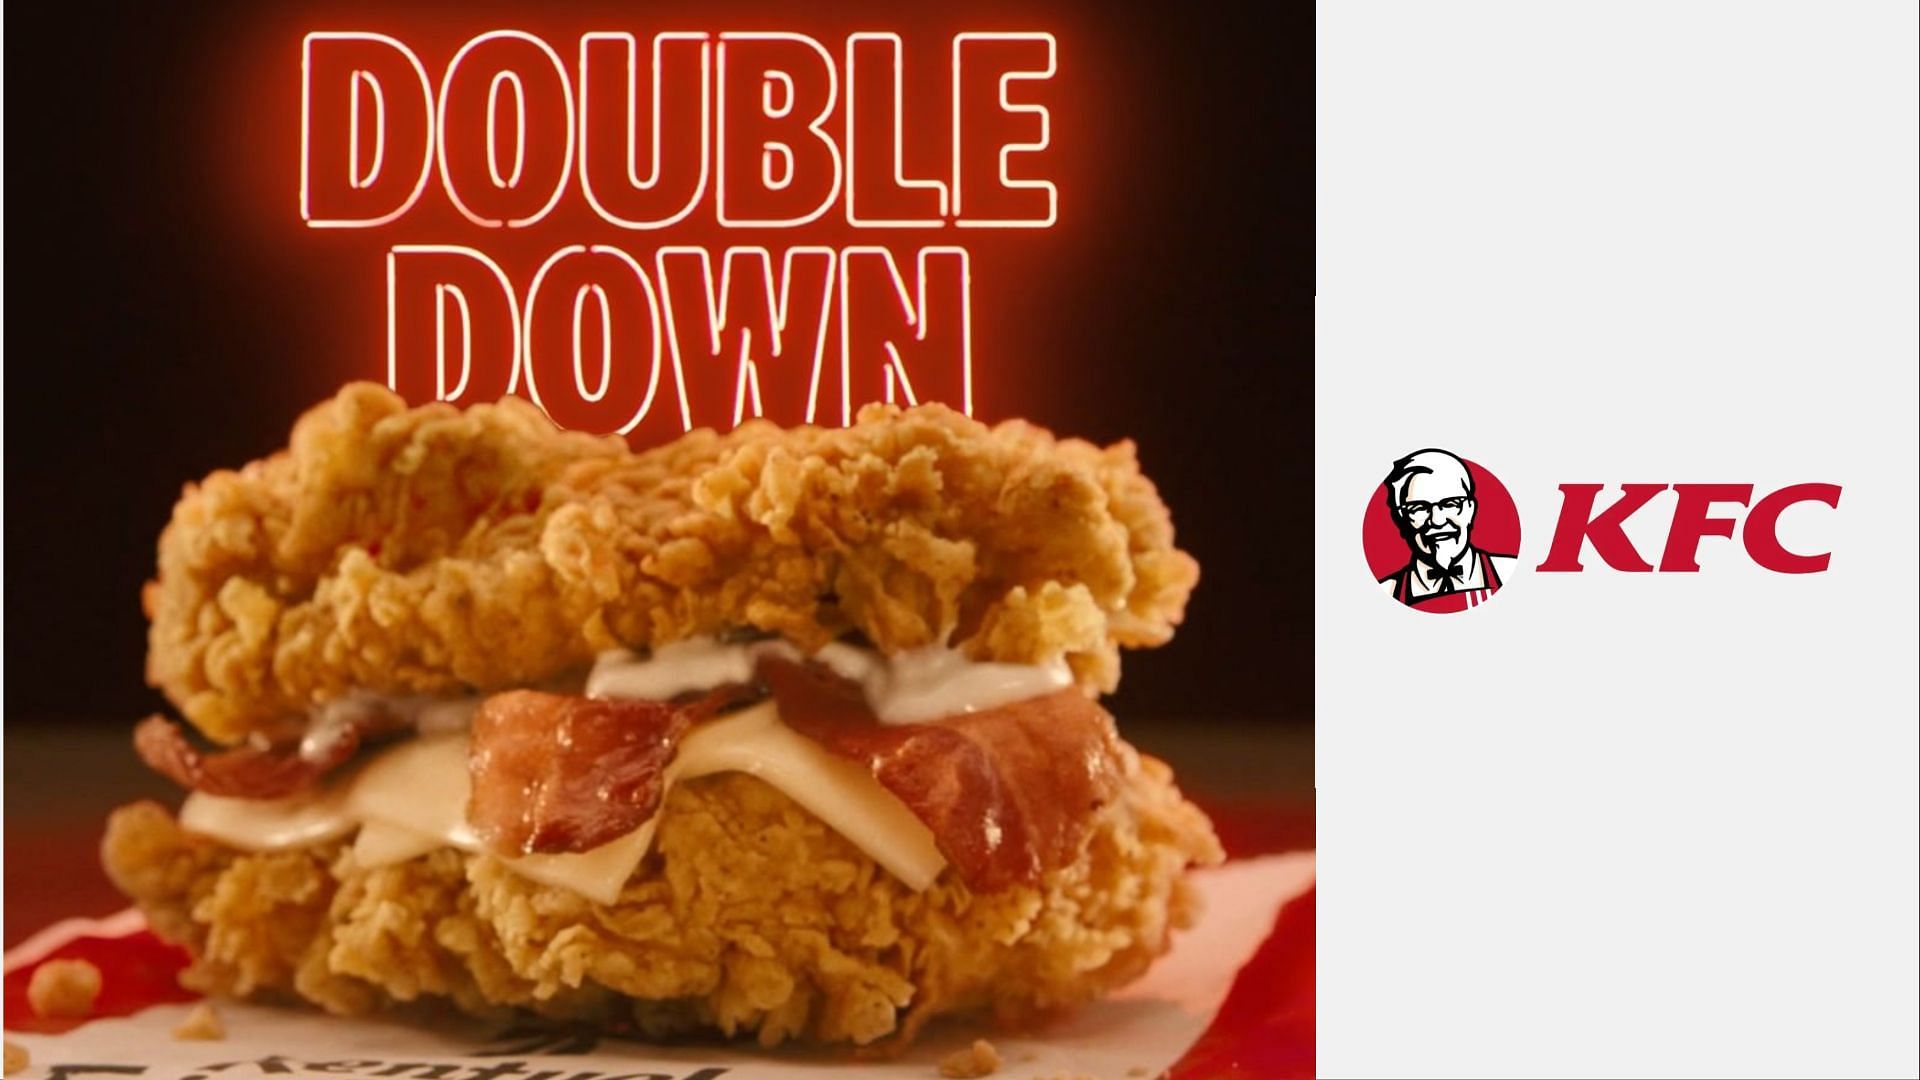 the Double Down burger is packed with over 610 calories (Imagege via Kentucky Fried Chicken)